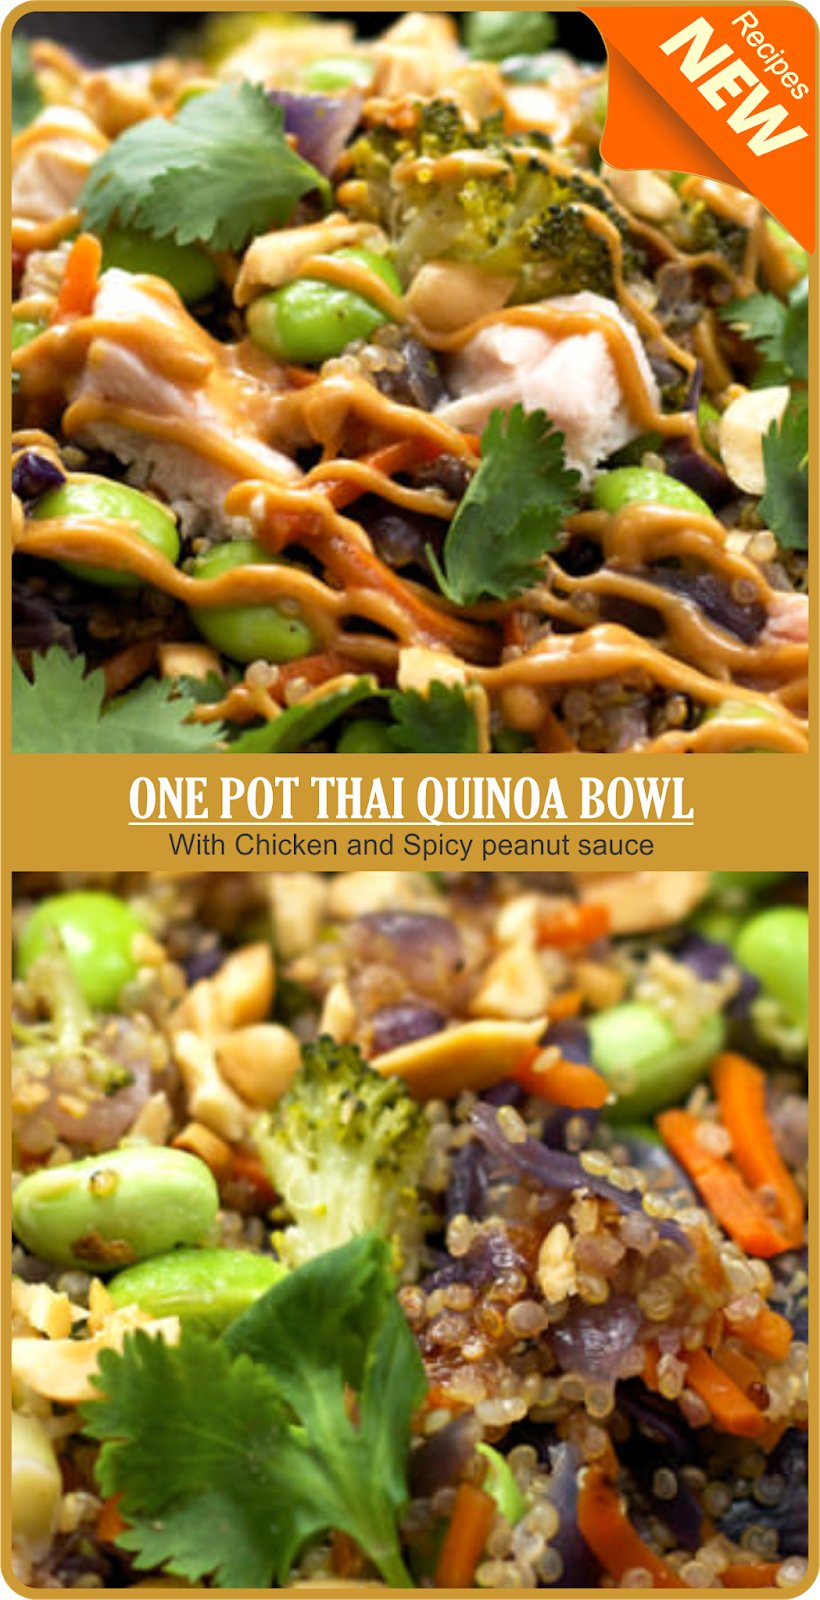 ONE POT THAI QUINOA BOWL WITH CHICKEN AND SPICY PEANUT SAUCE | Briana Berge